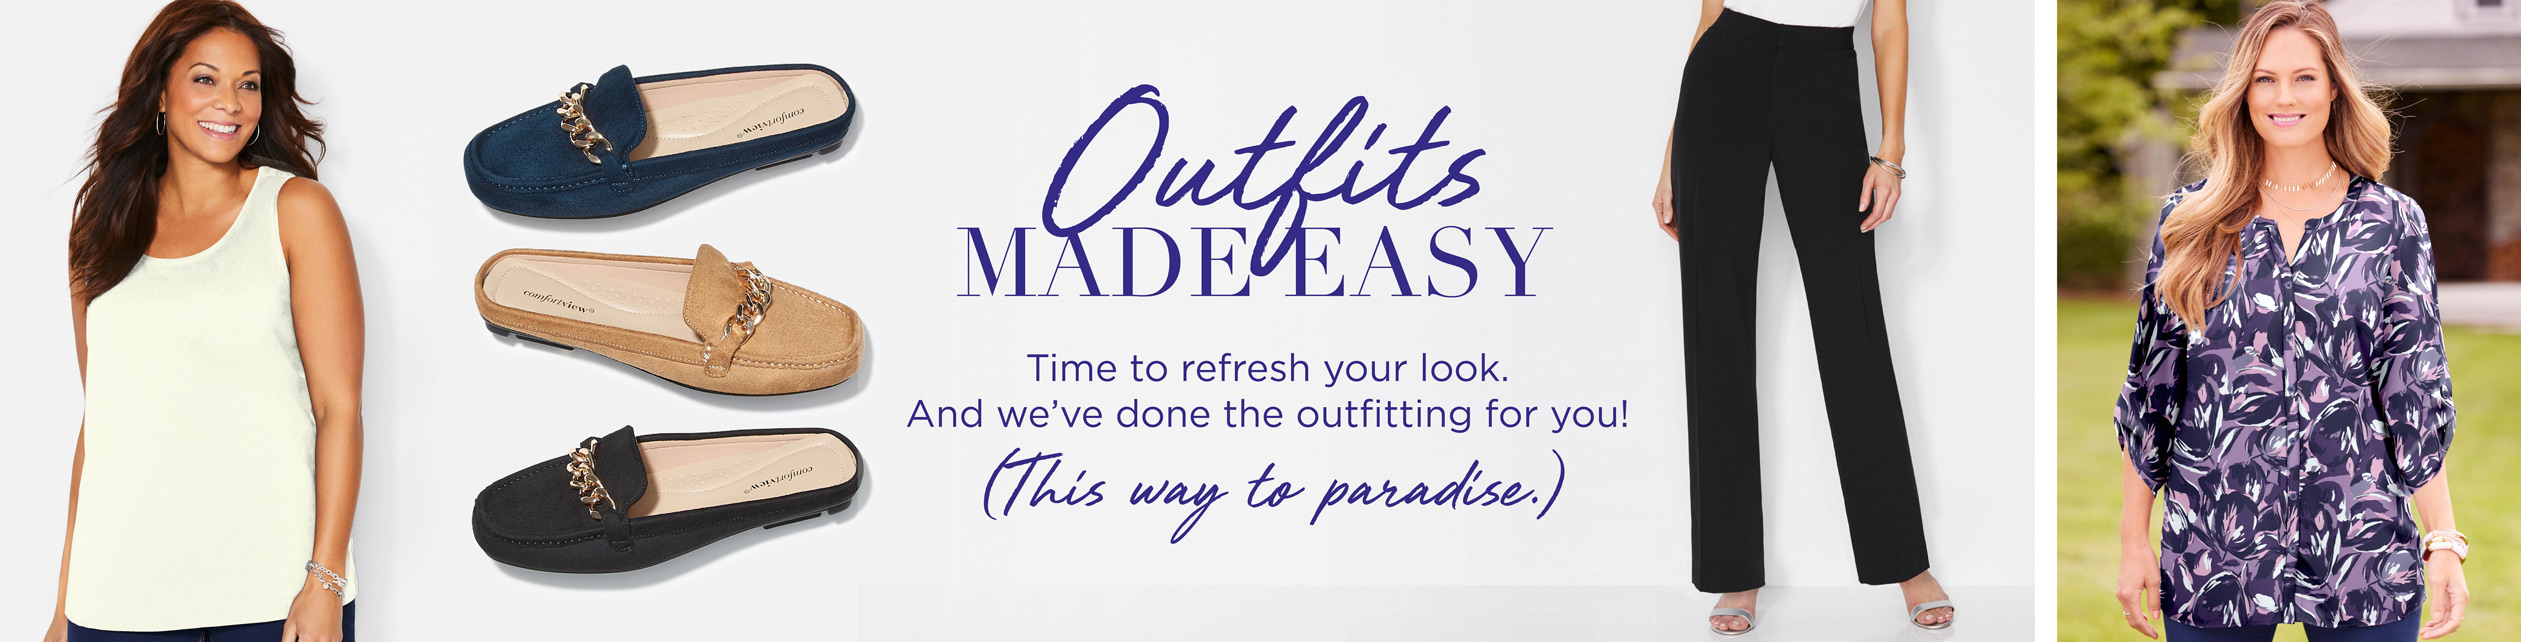 OUTFITS MADE EASY! Time to refresh your look. And we’ve done the outfitting for you!